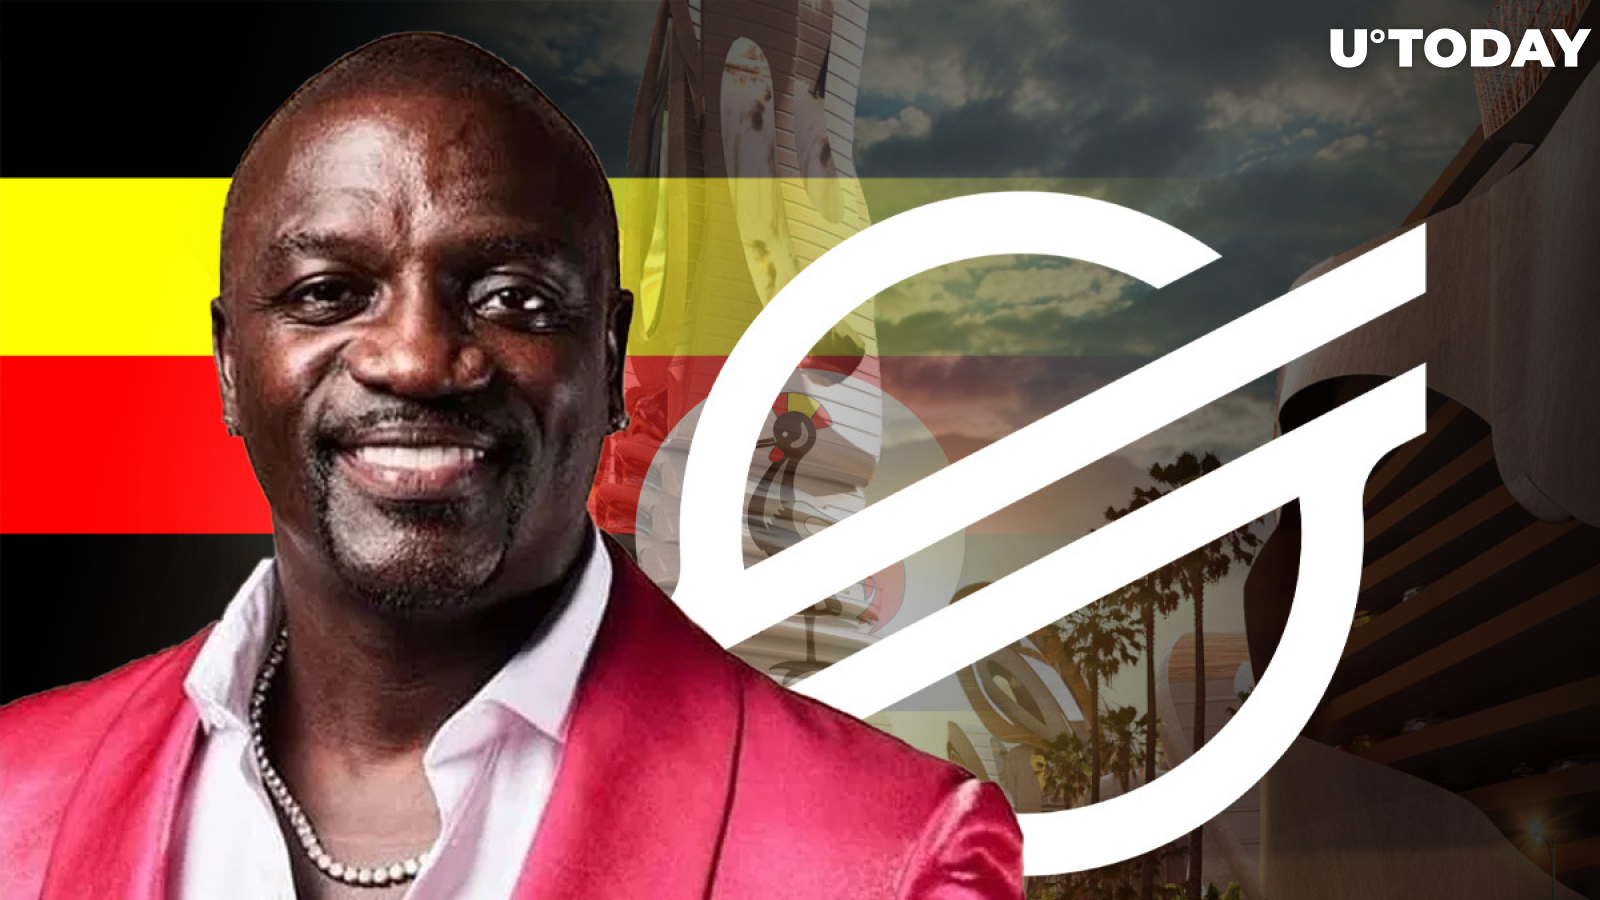 Akon's Stellar-Powered City to Be Built by 2036